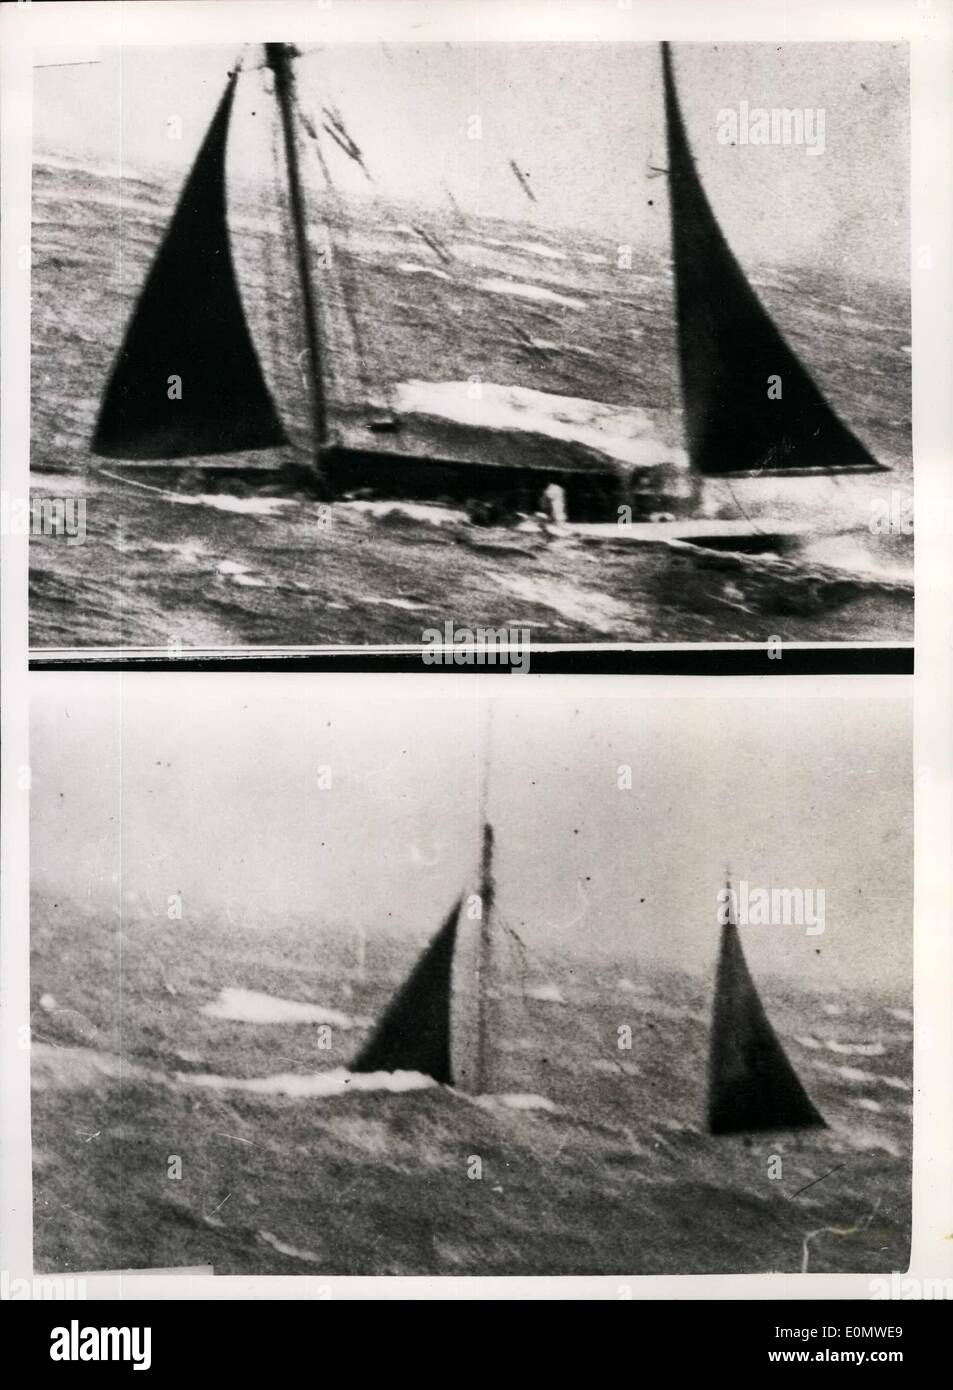 Jul. 07, 1956 - Ketch that won Torbay-Lisbon Race - goes down. ''Moyana'' sinks off coast of Cornwall.: The 103 ton Ketch ''Moyana'' - which recently won the Torbay - Lisbon sailing ship race - sank off the coast of Cornwall yesterday during the worse-ever July Gale - that created havoc in all parts of the country. Boys of the Southampton School of Navigation - whose ages average 16 - were taken from the vessel a short time before she sank by the vessel Clan MacLean. No lives were lost Stock Photo